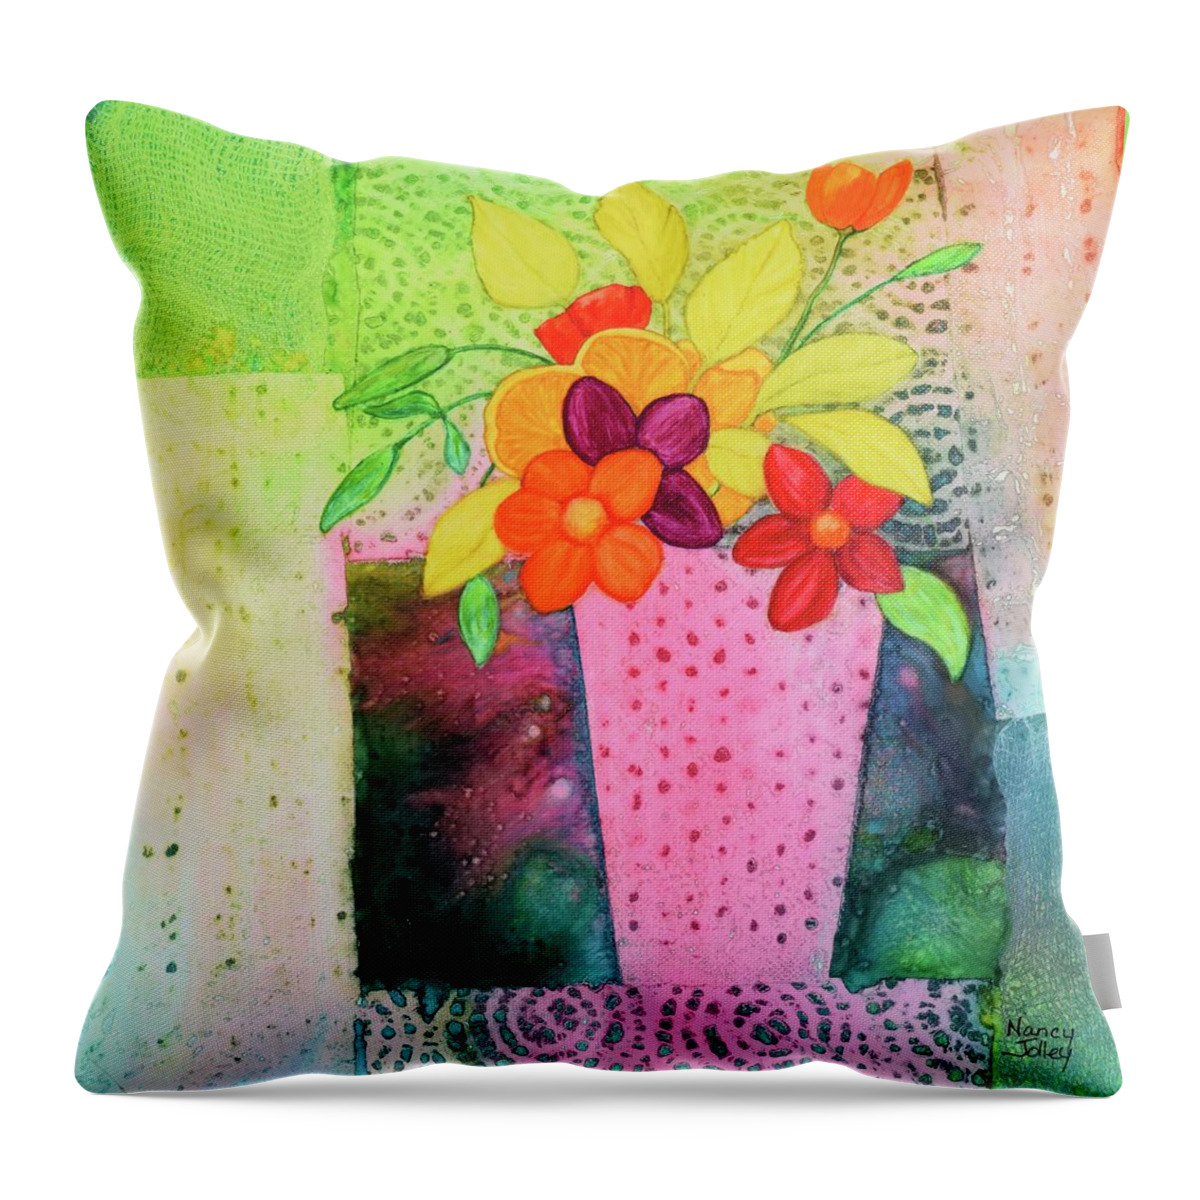 Flowers Throw Pillow featuring the painting Imagining Spring by Nancy Jolley